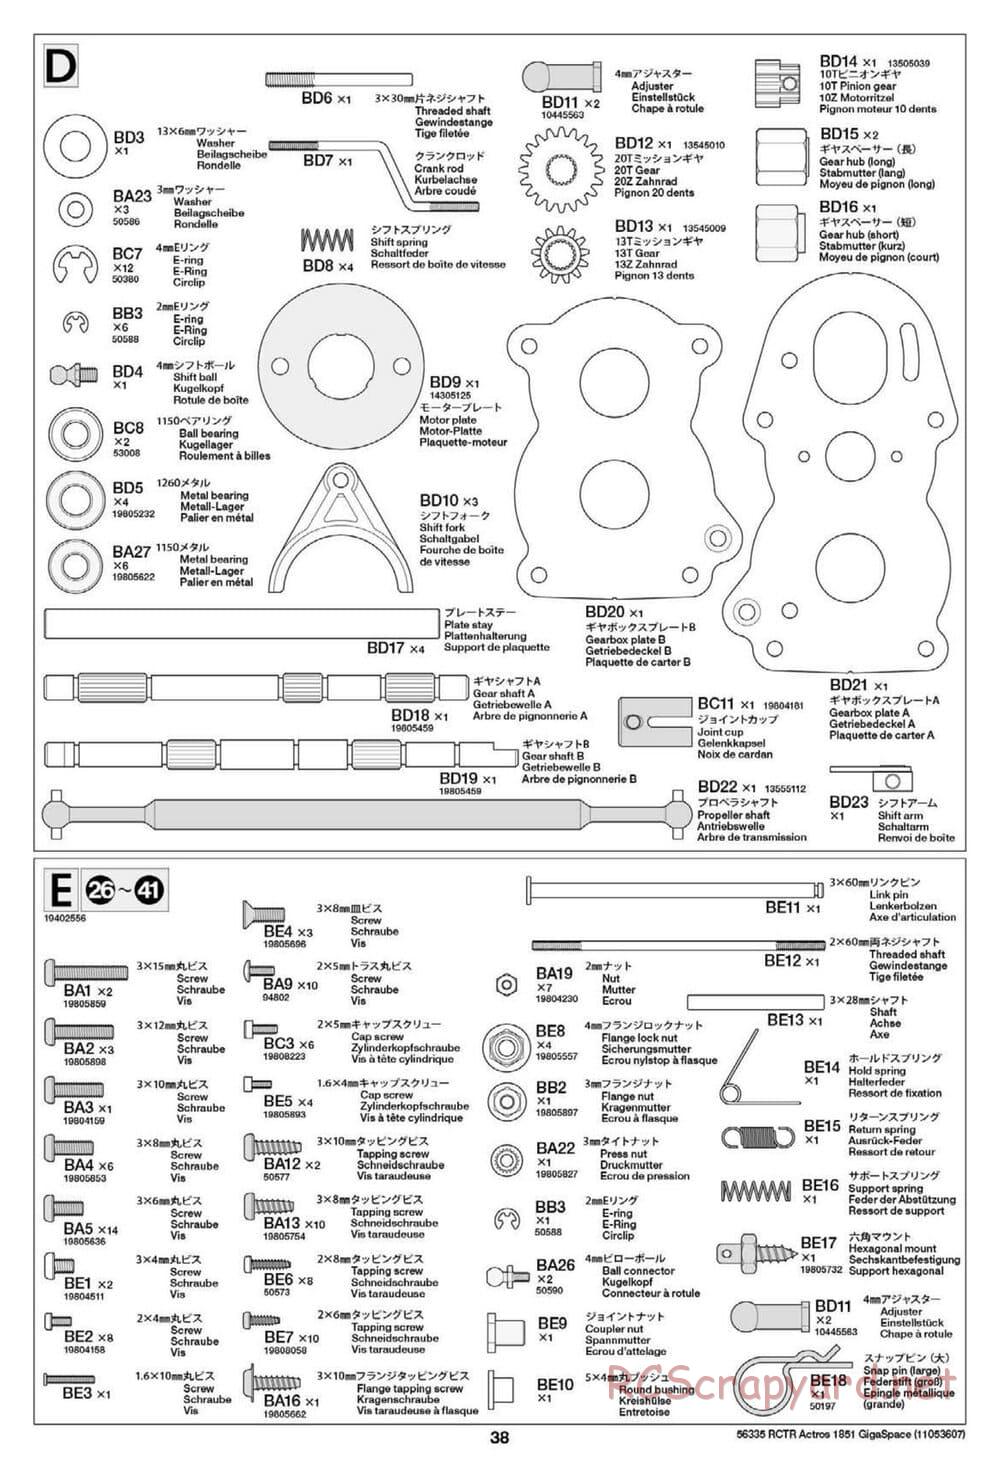 Tamiya - Mercedes-Benz Actros 1851 Gigaspace Tractor Truck Chassis - Manual - Page 38